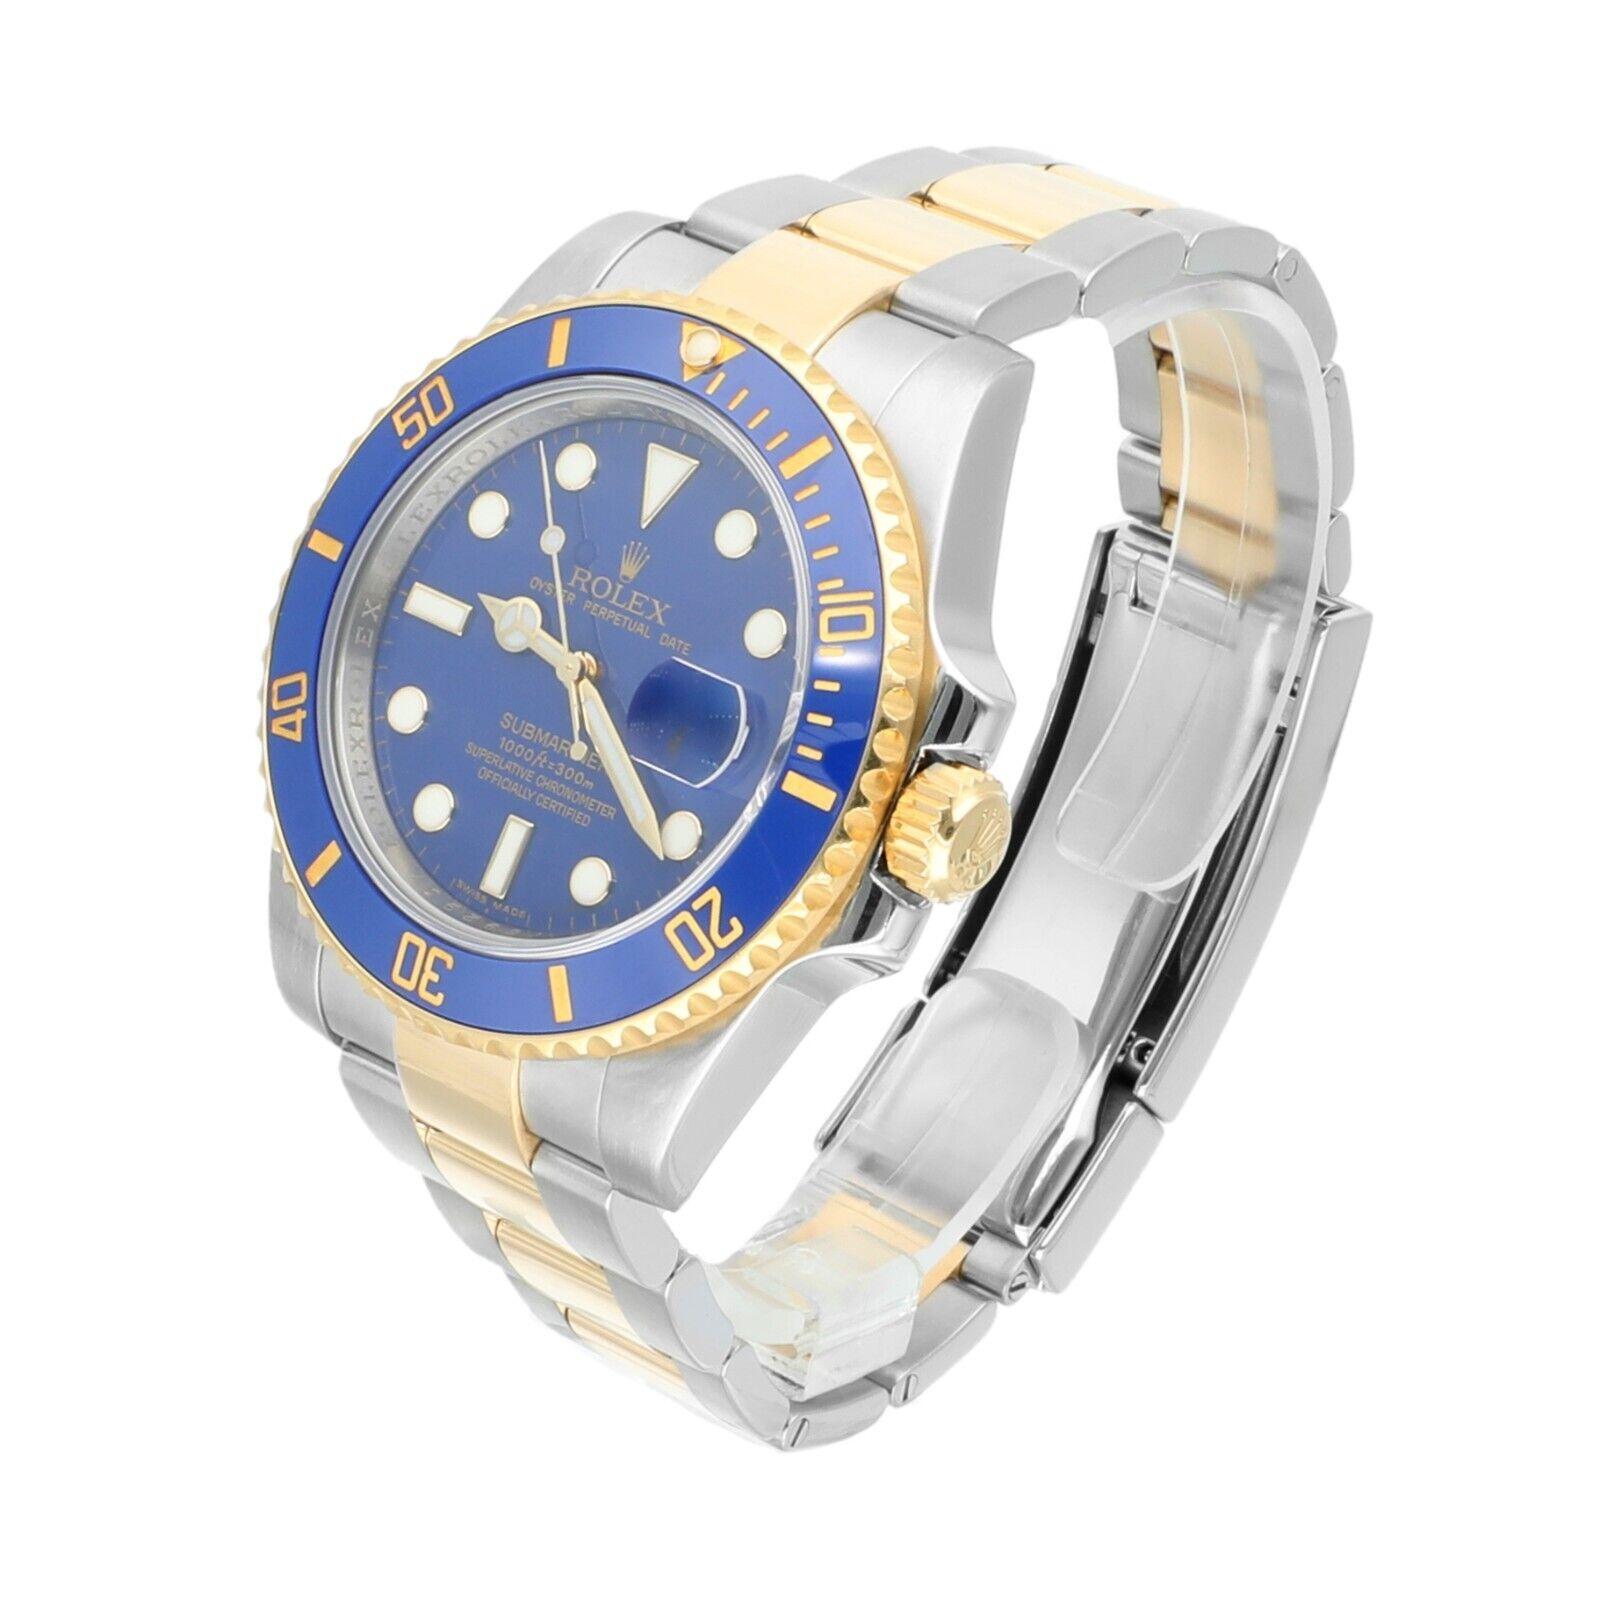 Women's or Men's Rolex Submariner Date 116613LB Ceramic Bezel Yellow Gold/Stainless Steel Watch For Sale